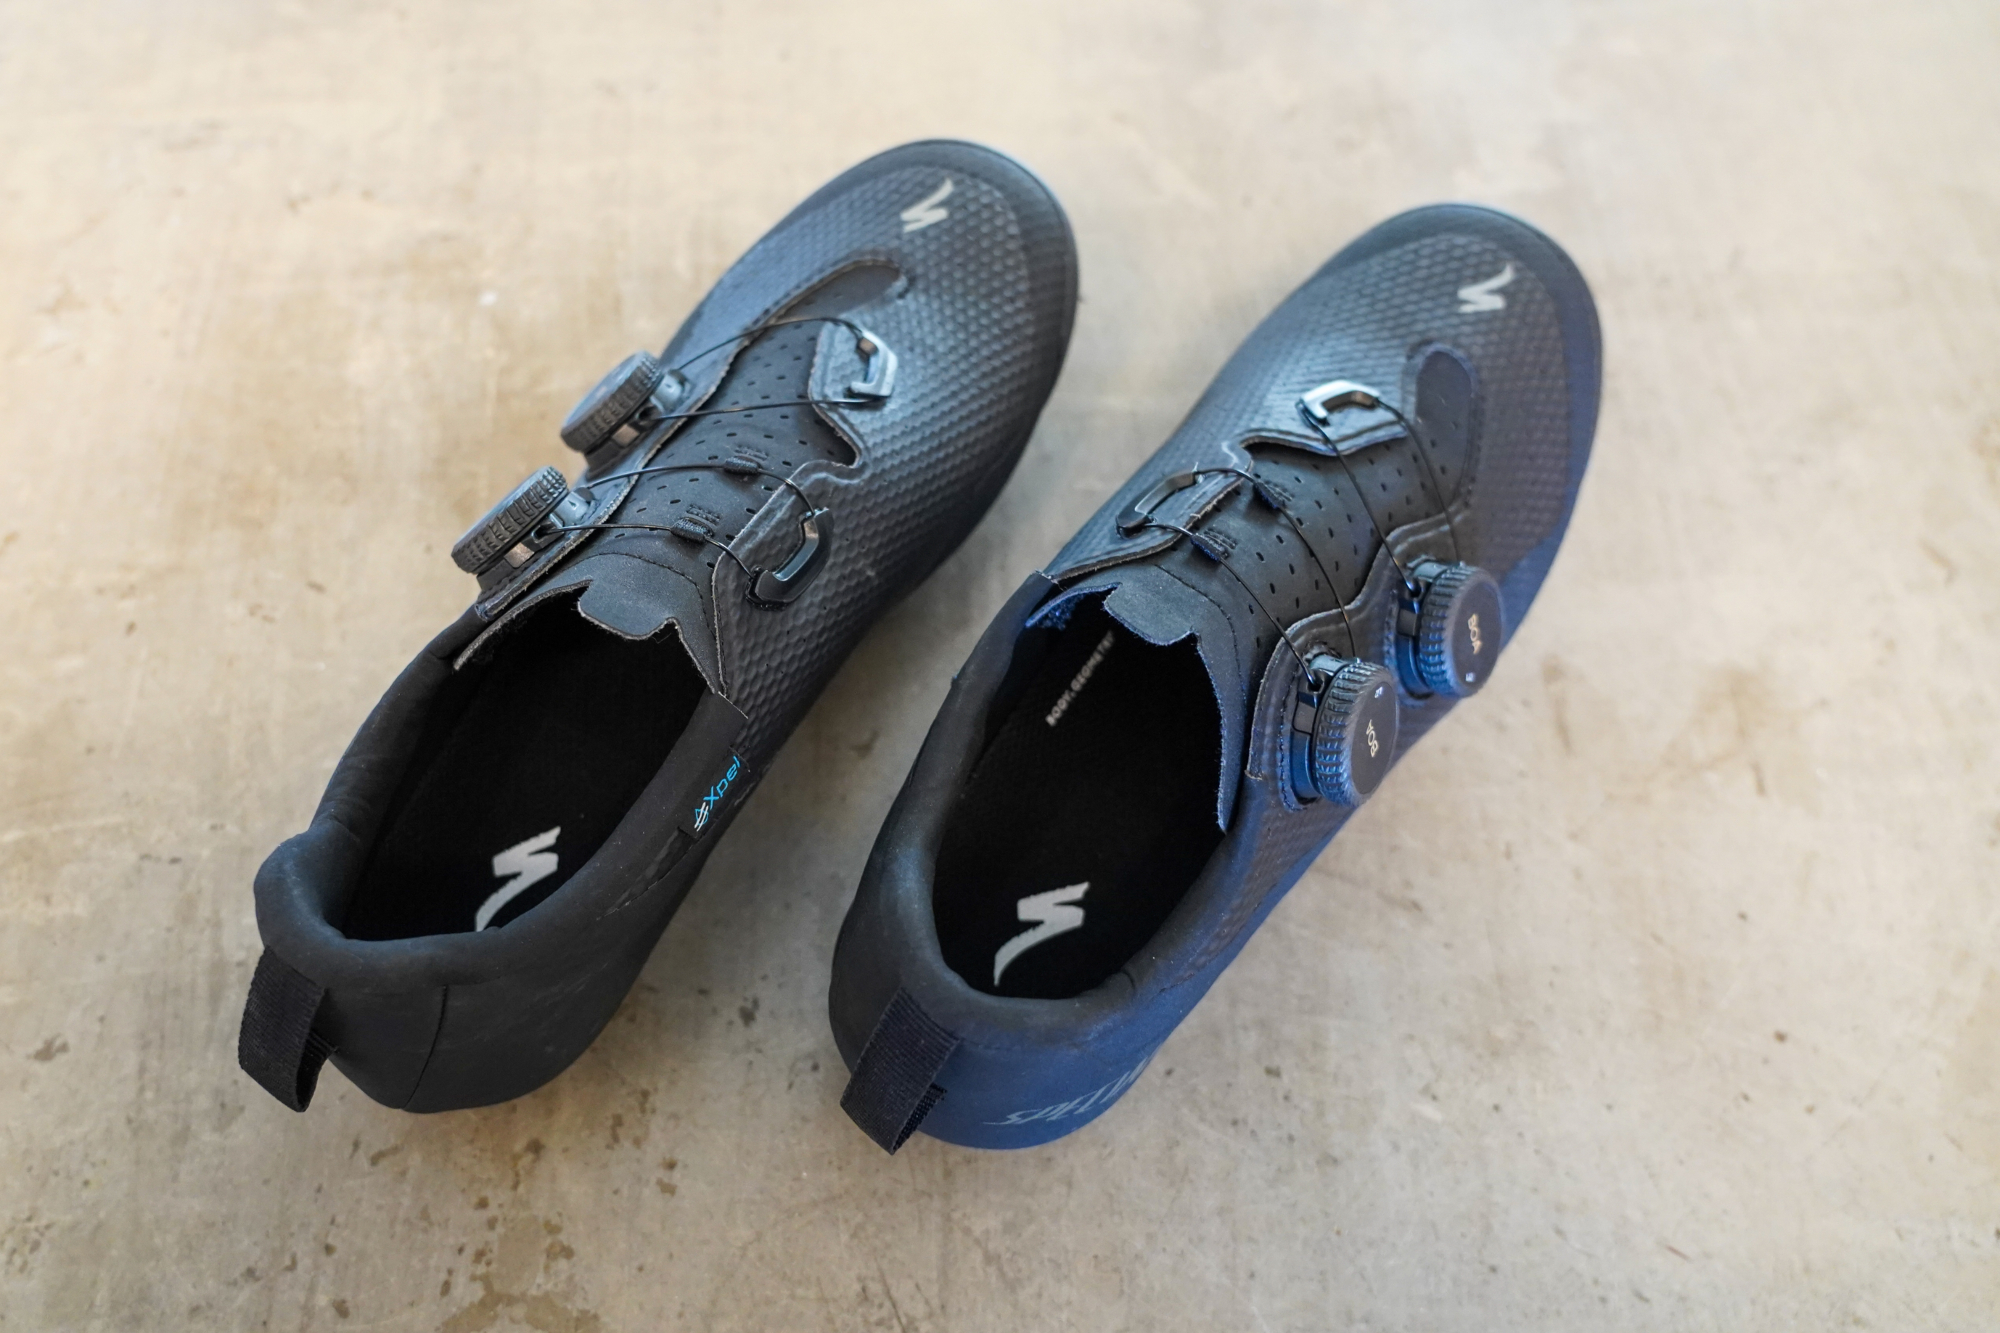 Specialized's revamped Recon 3.0 shoes